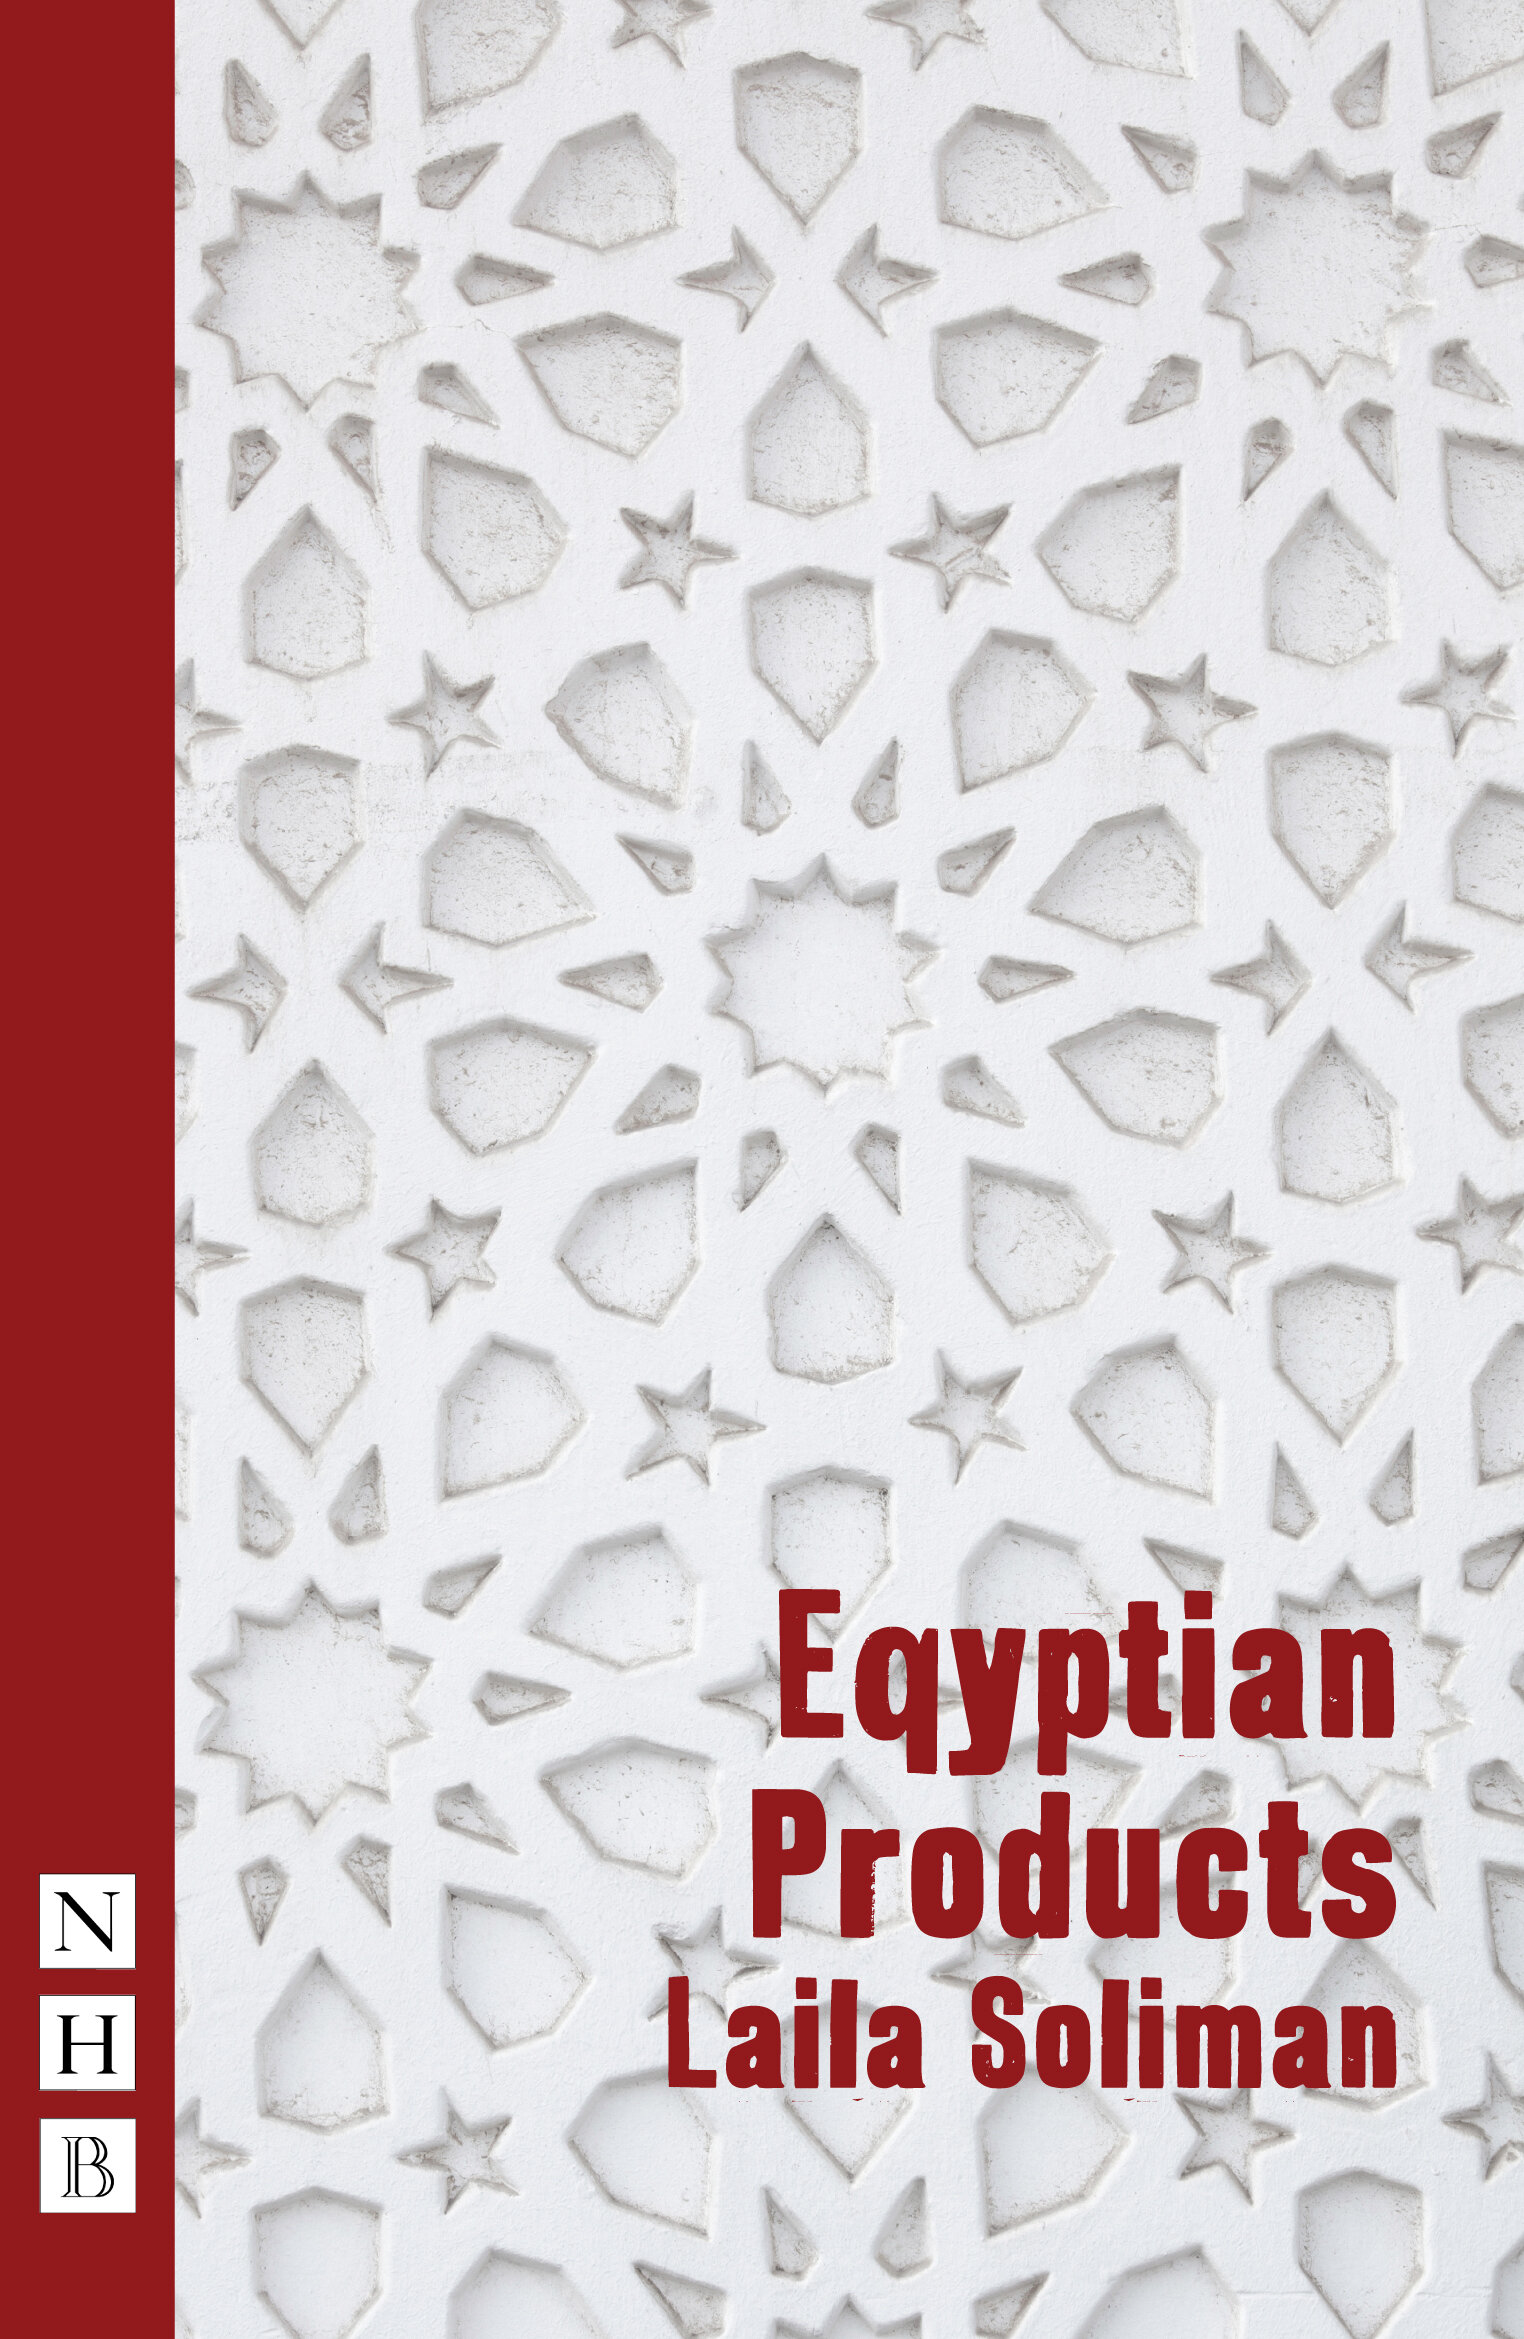 Egyptian Products.jpg